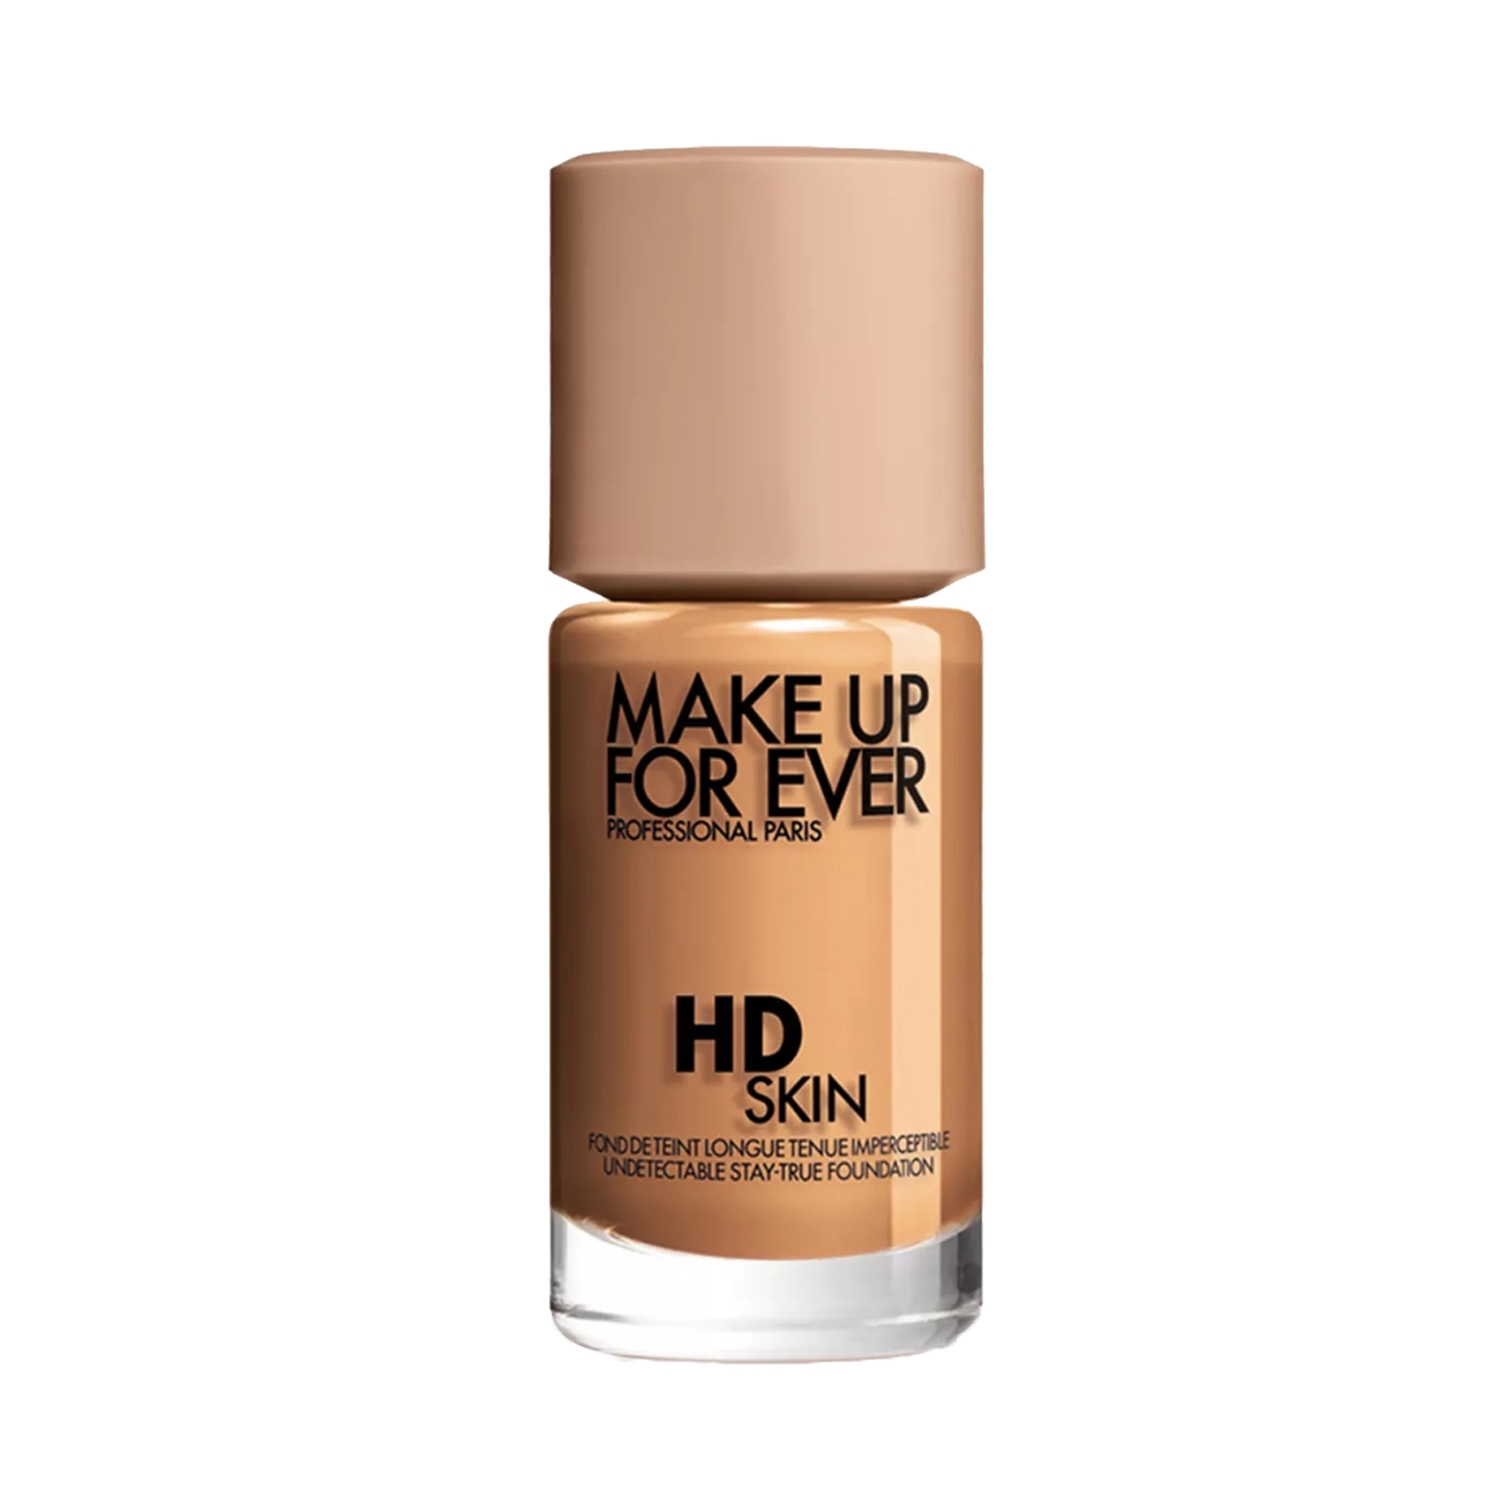 Make Up For Ever | Make Up For Ever Hd Skin Foundation-3Y46 (Y425) (30ml)